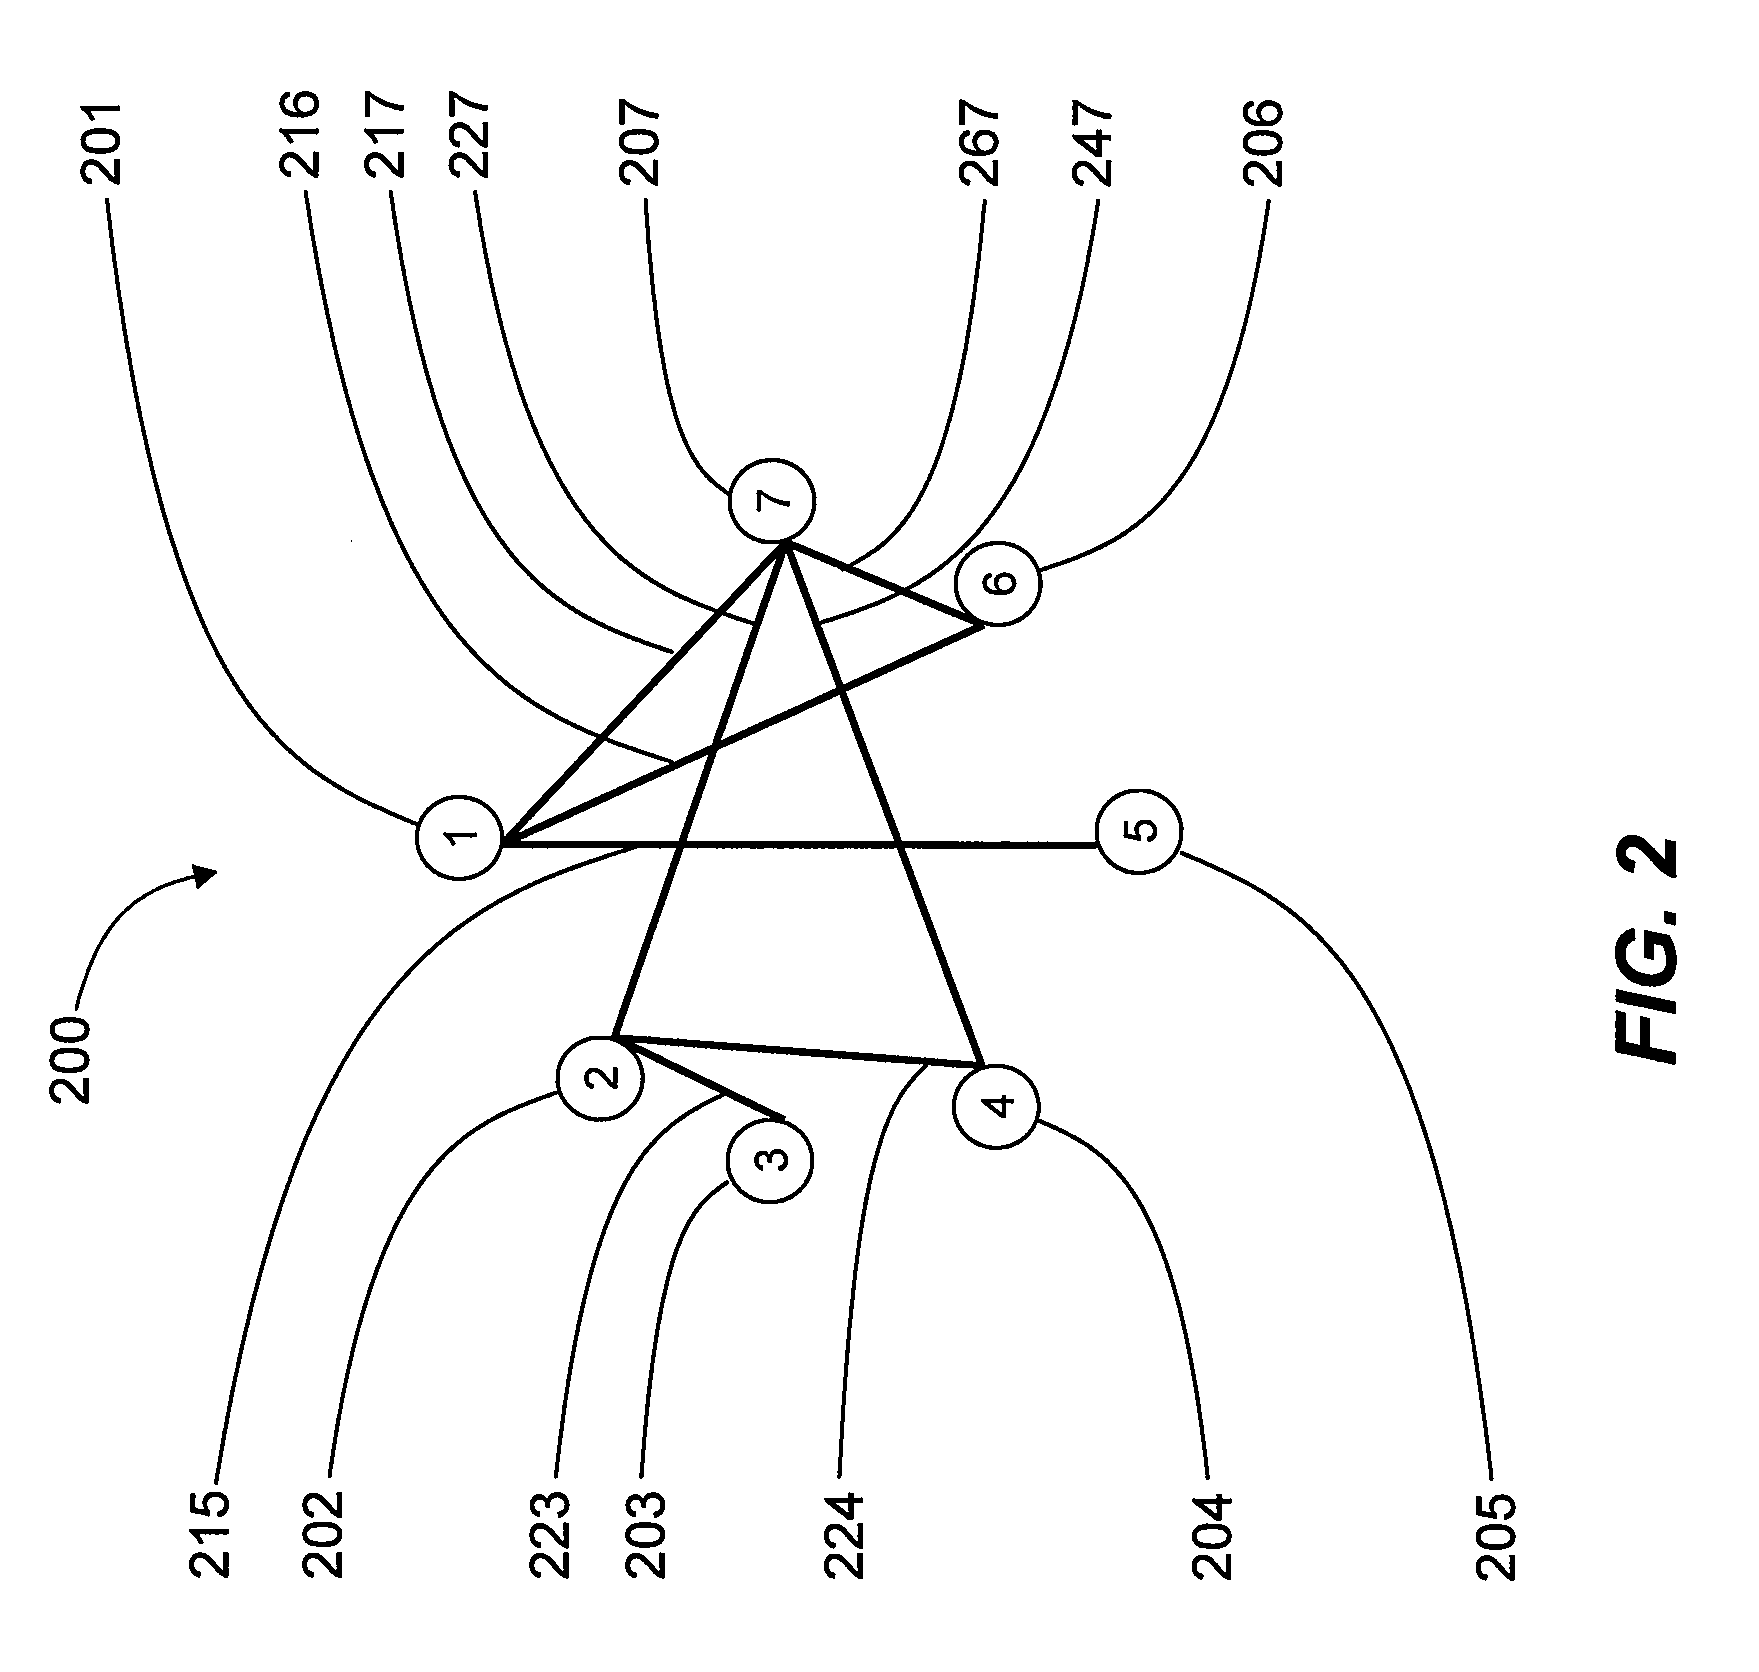 Systems, devices, and methods for analog processing